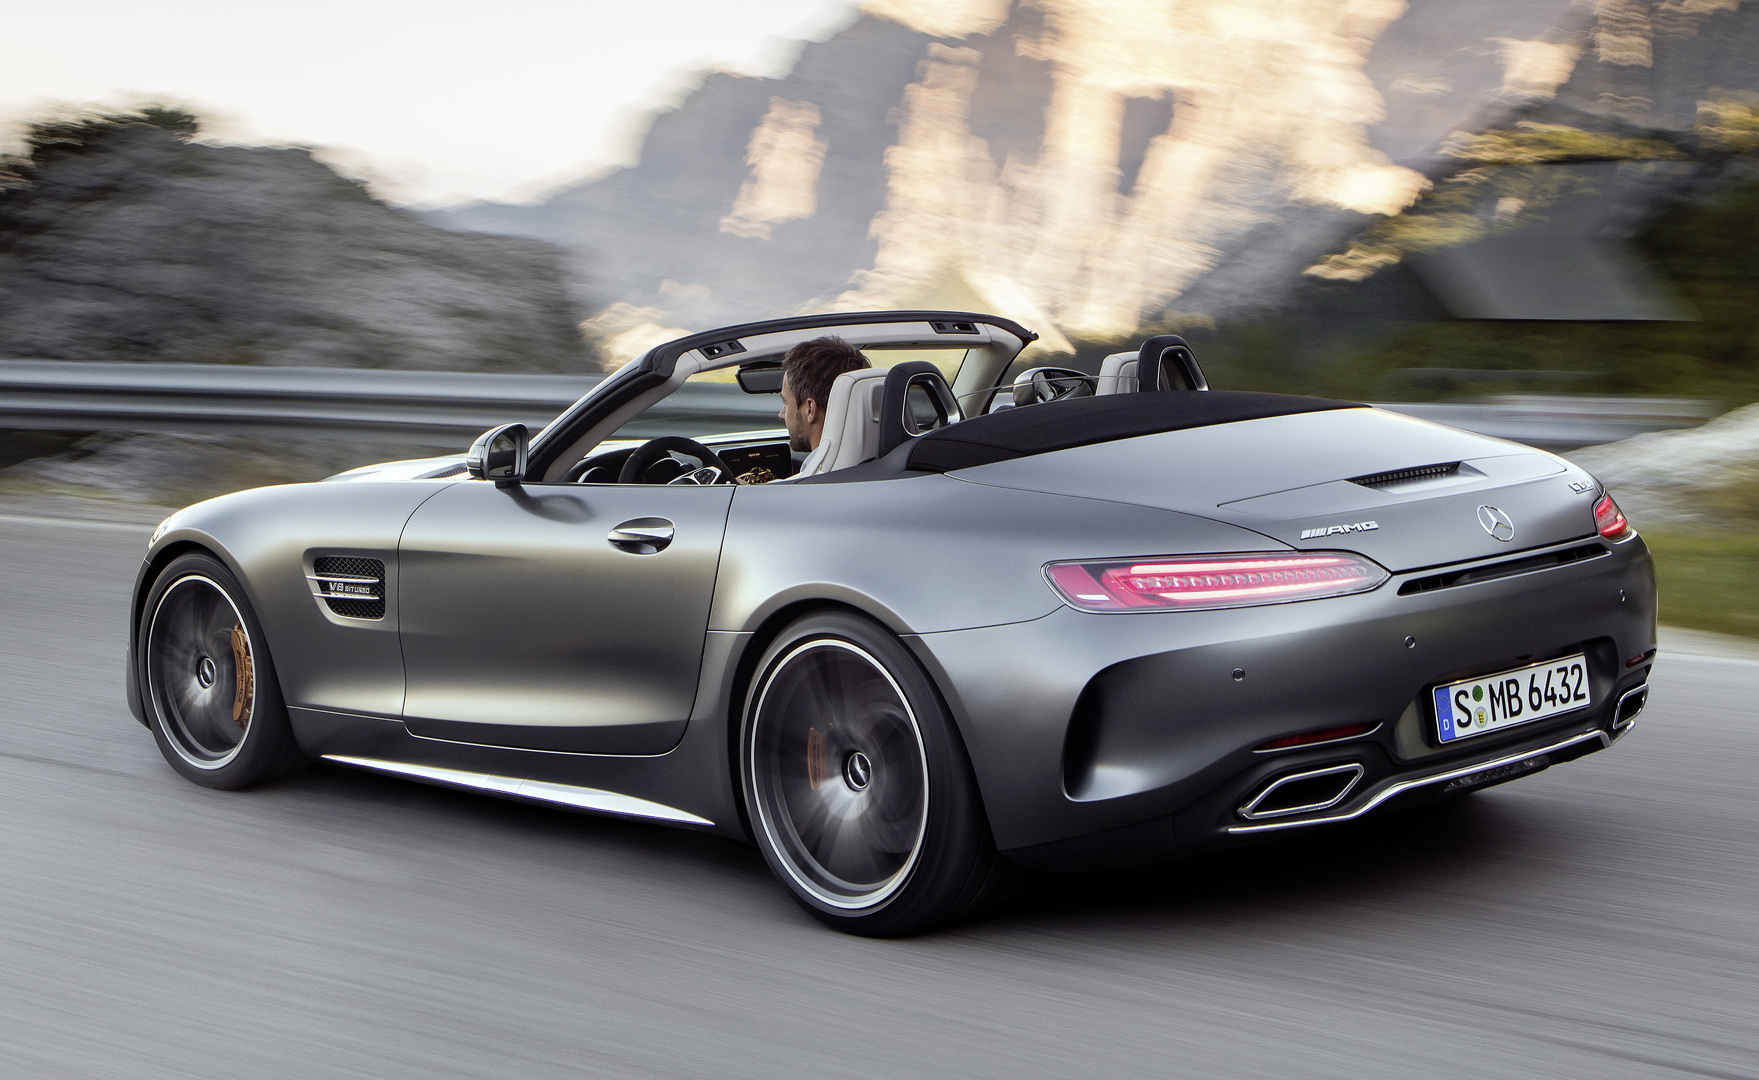 Mercedes-AMG GT C Roadster revealed as new drop-top sports car